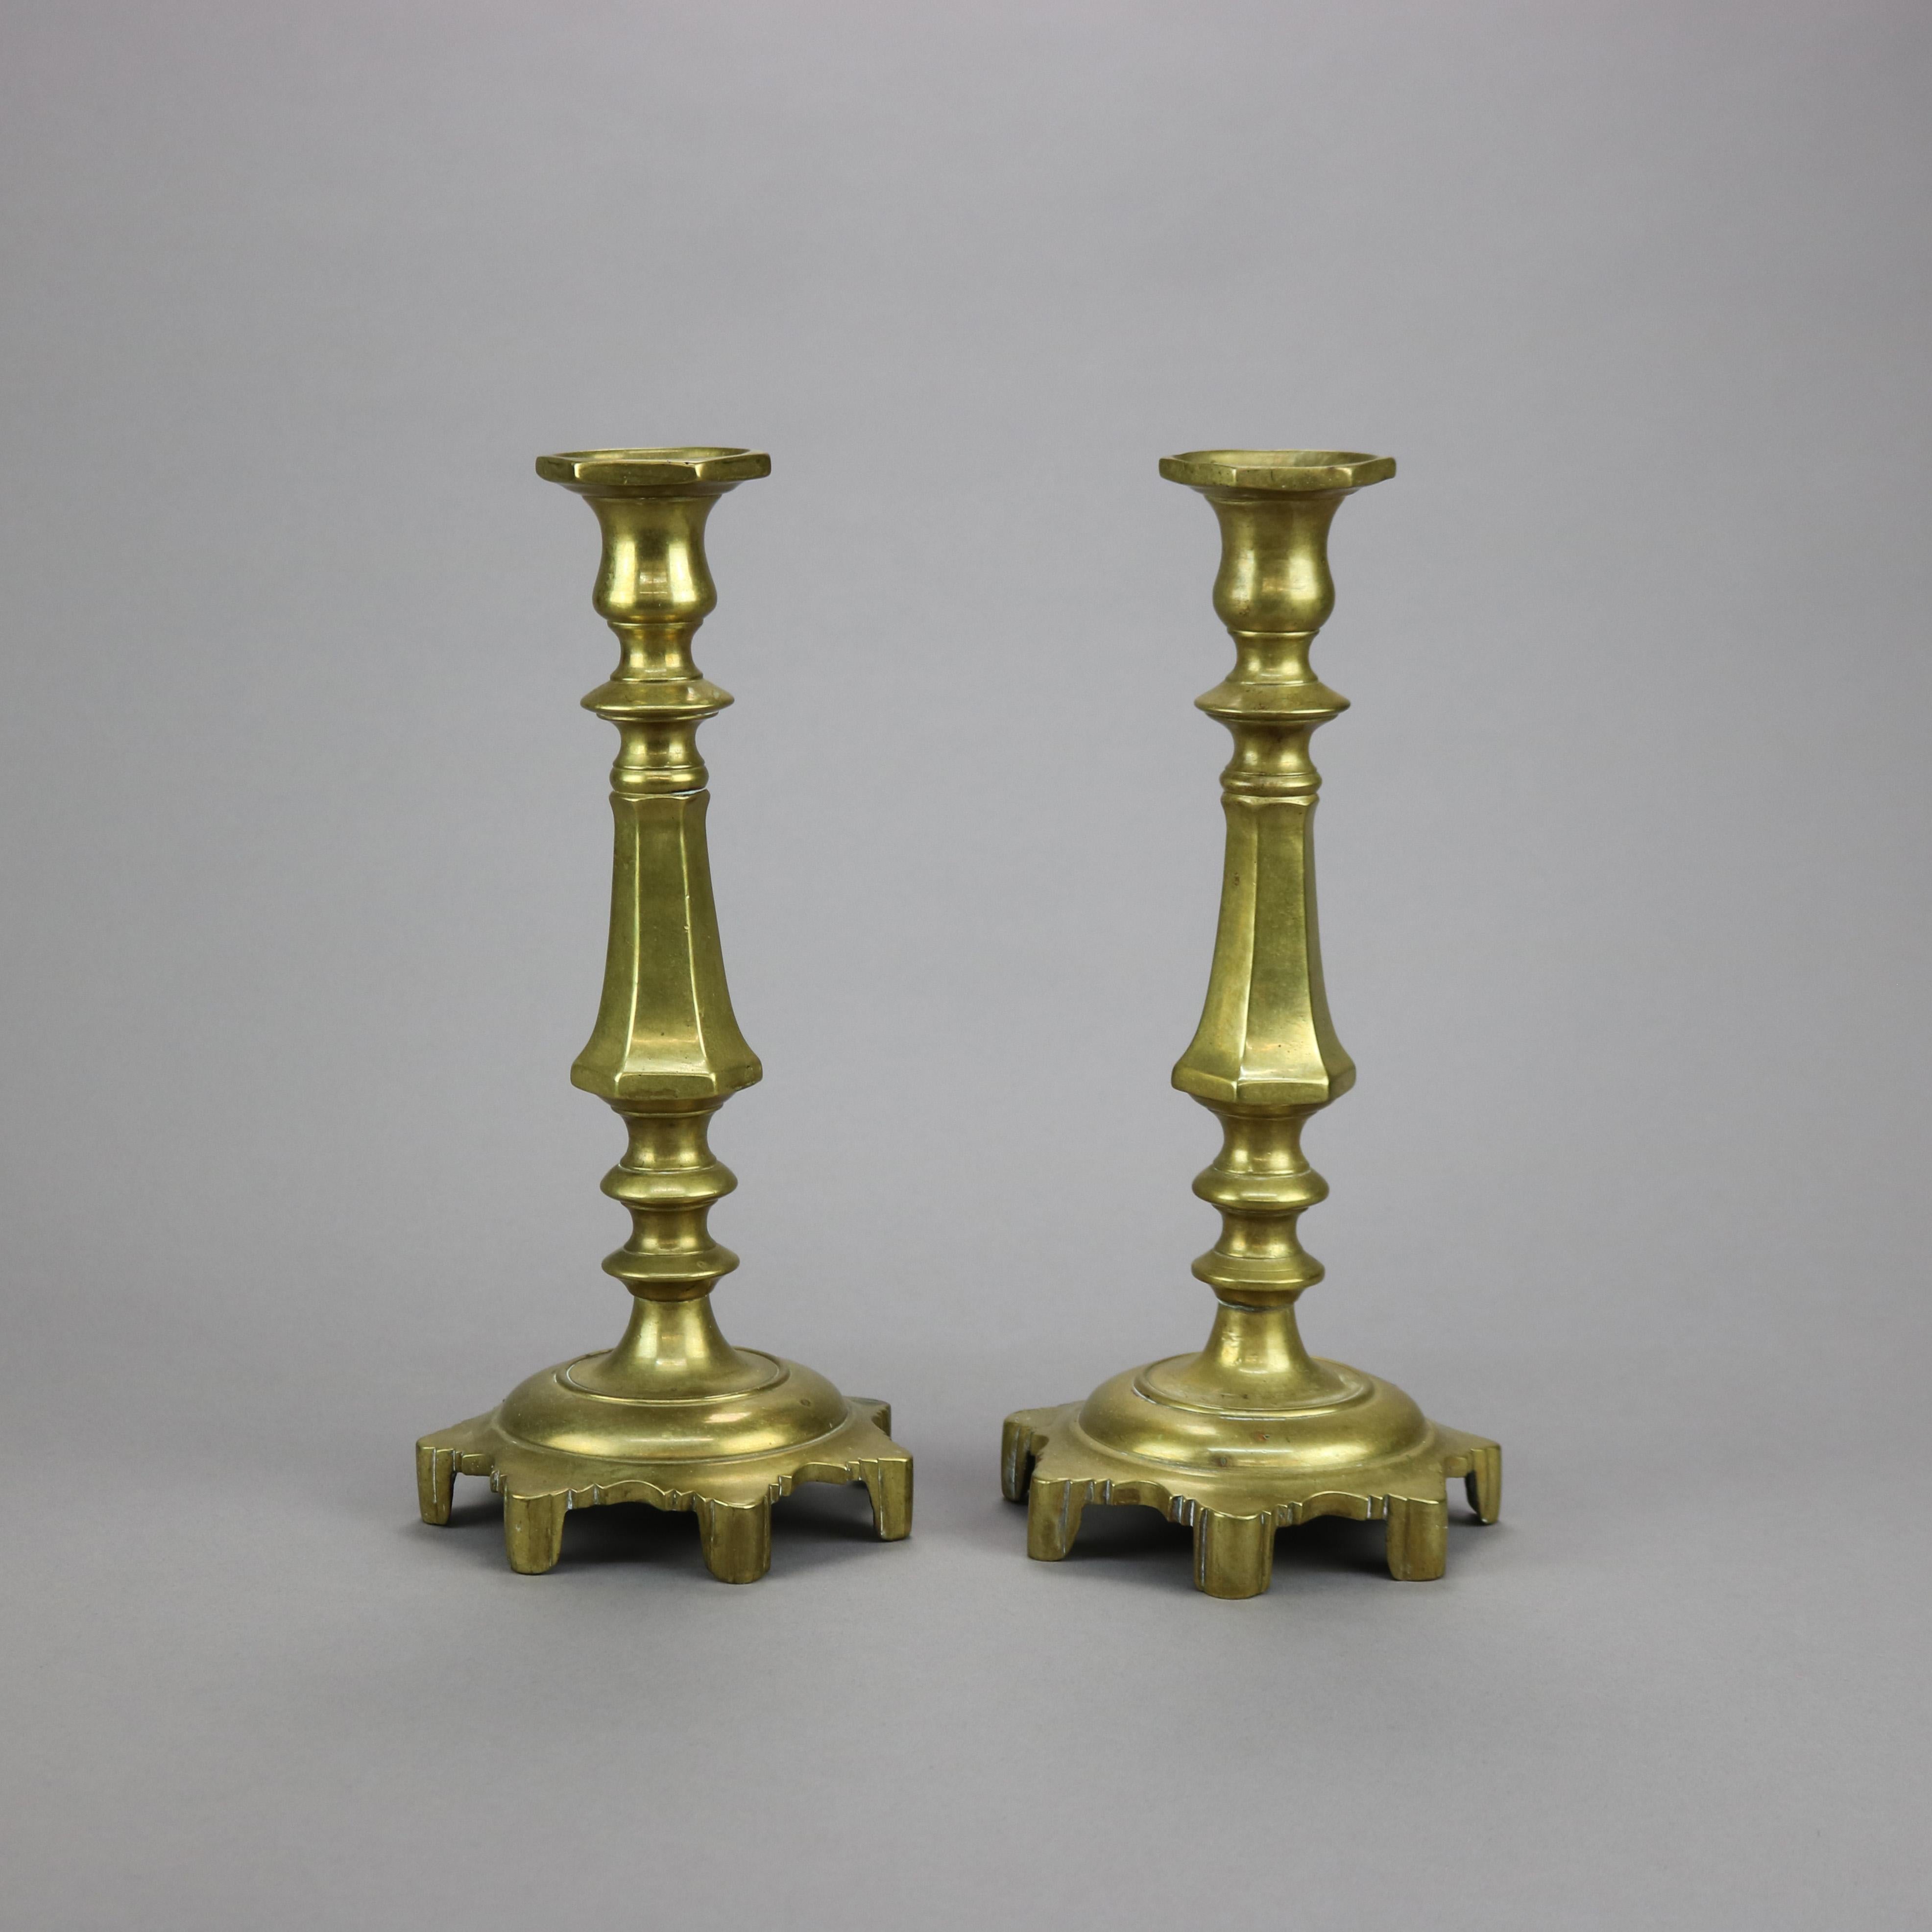 Cast Antique Pair of Early American Brass Balustrade Footed Candlesticks 19th C For Sale